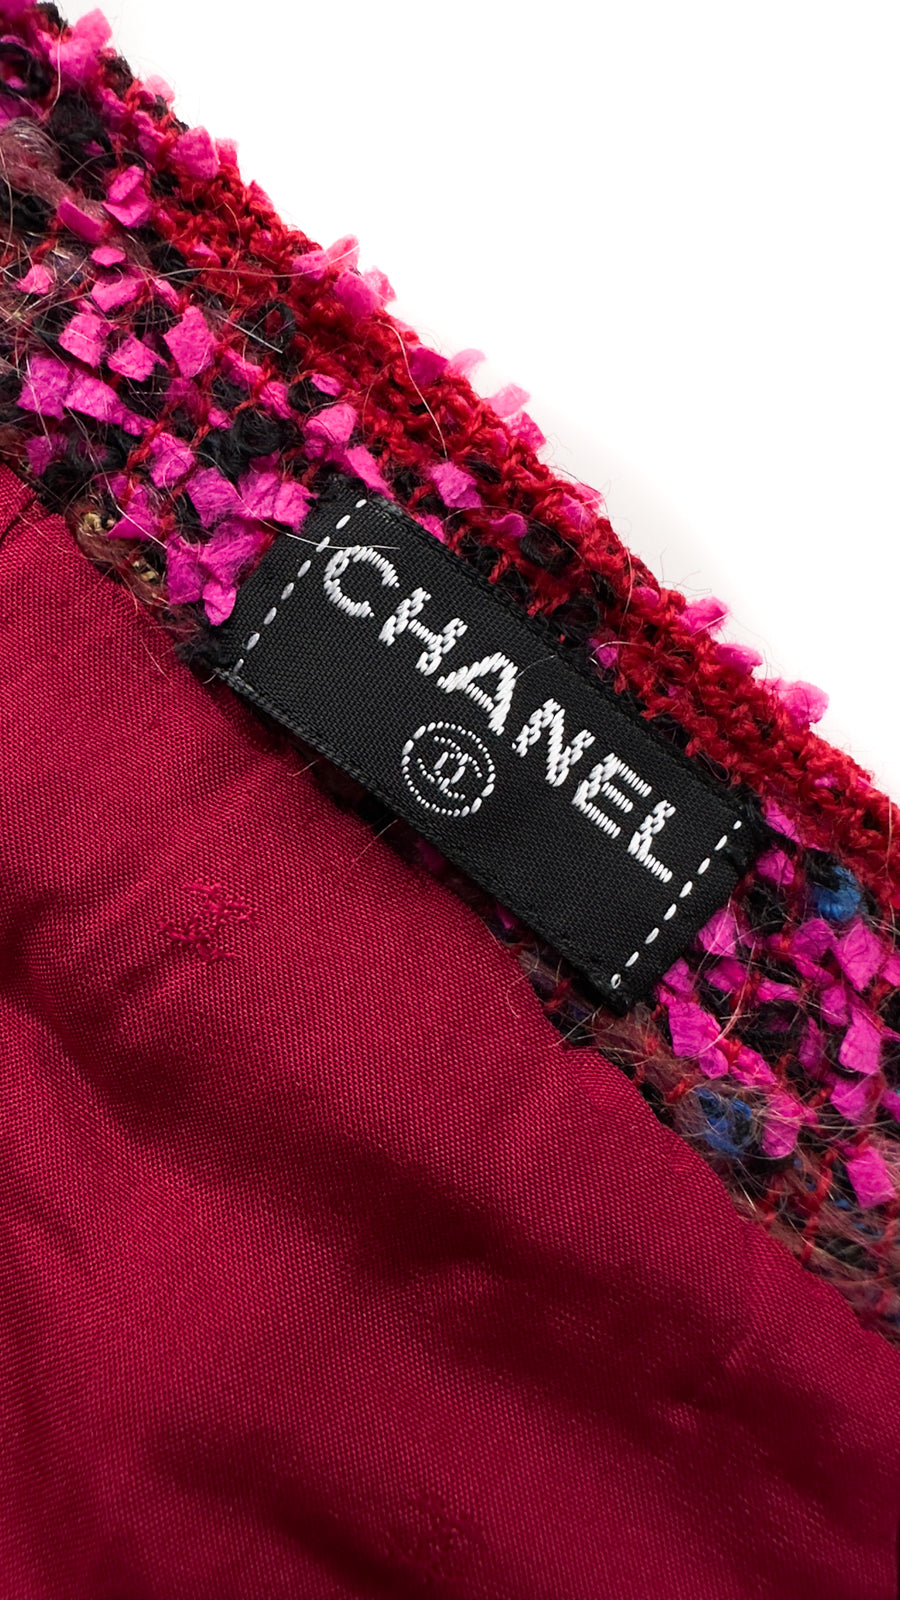 CHANEL 91A Vintage Pink Red Multicolor Tweed Skirt Matelasse Buttons 36 38  シャネル ヴィンテージ・ピンク・レッド・マトラッセボタン・ツイード・スカート 即発